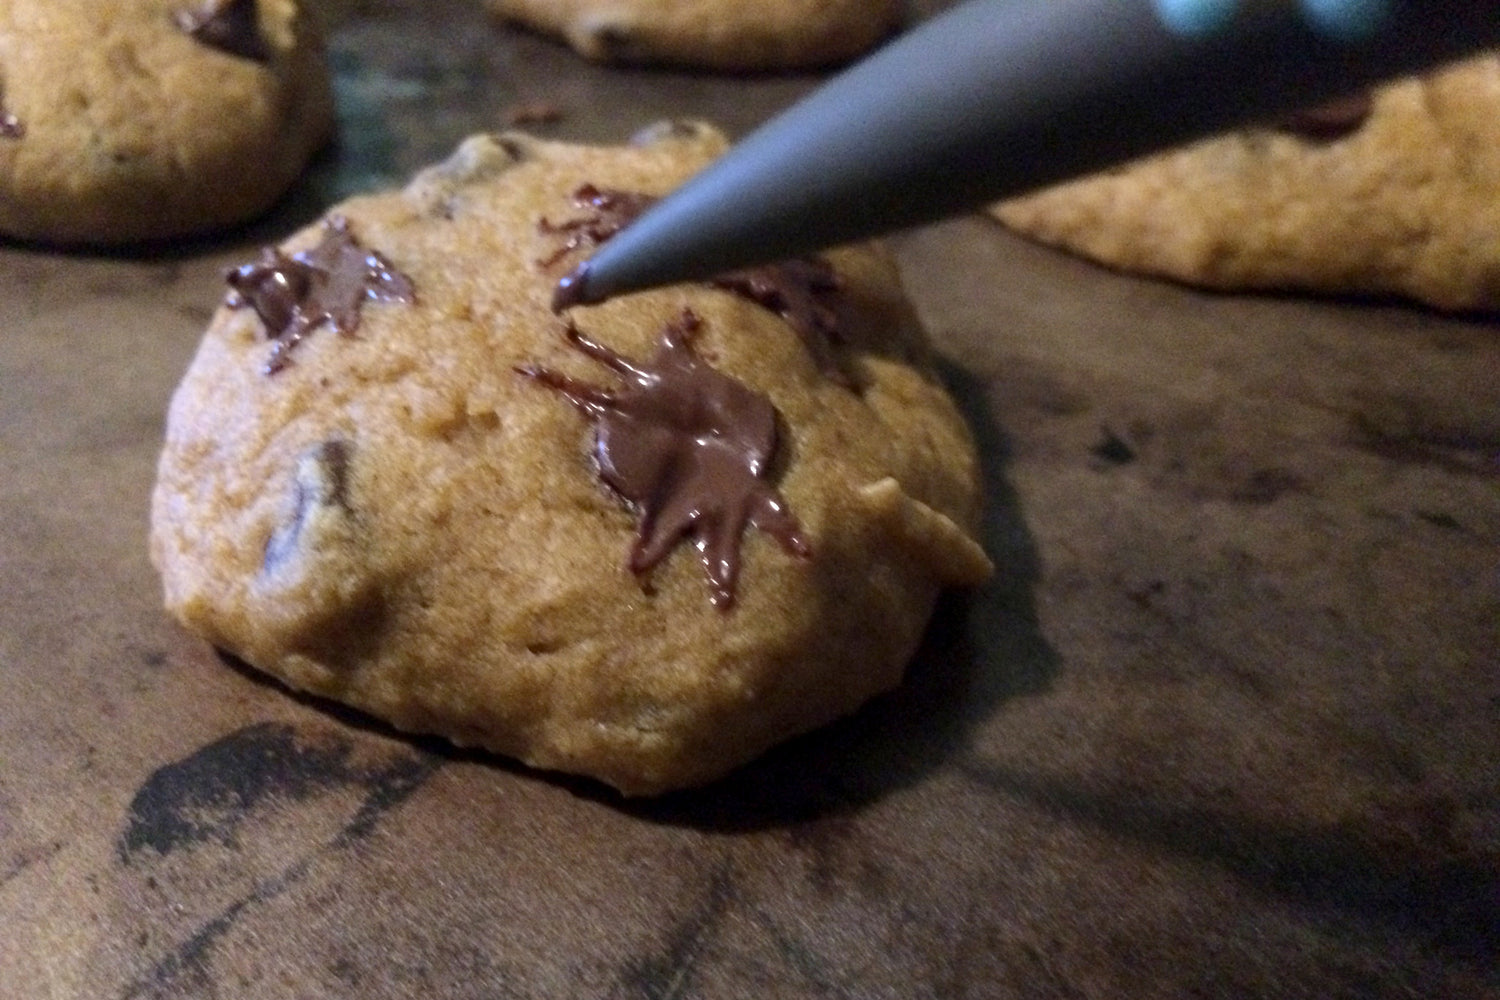 Don't compost those carvings- make cookies!